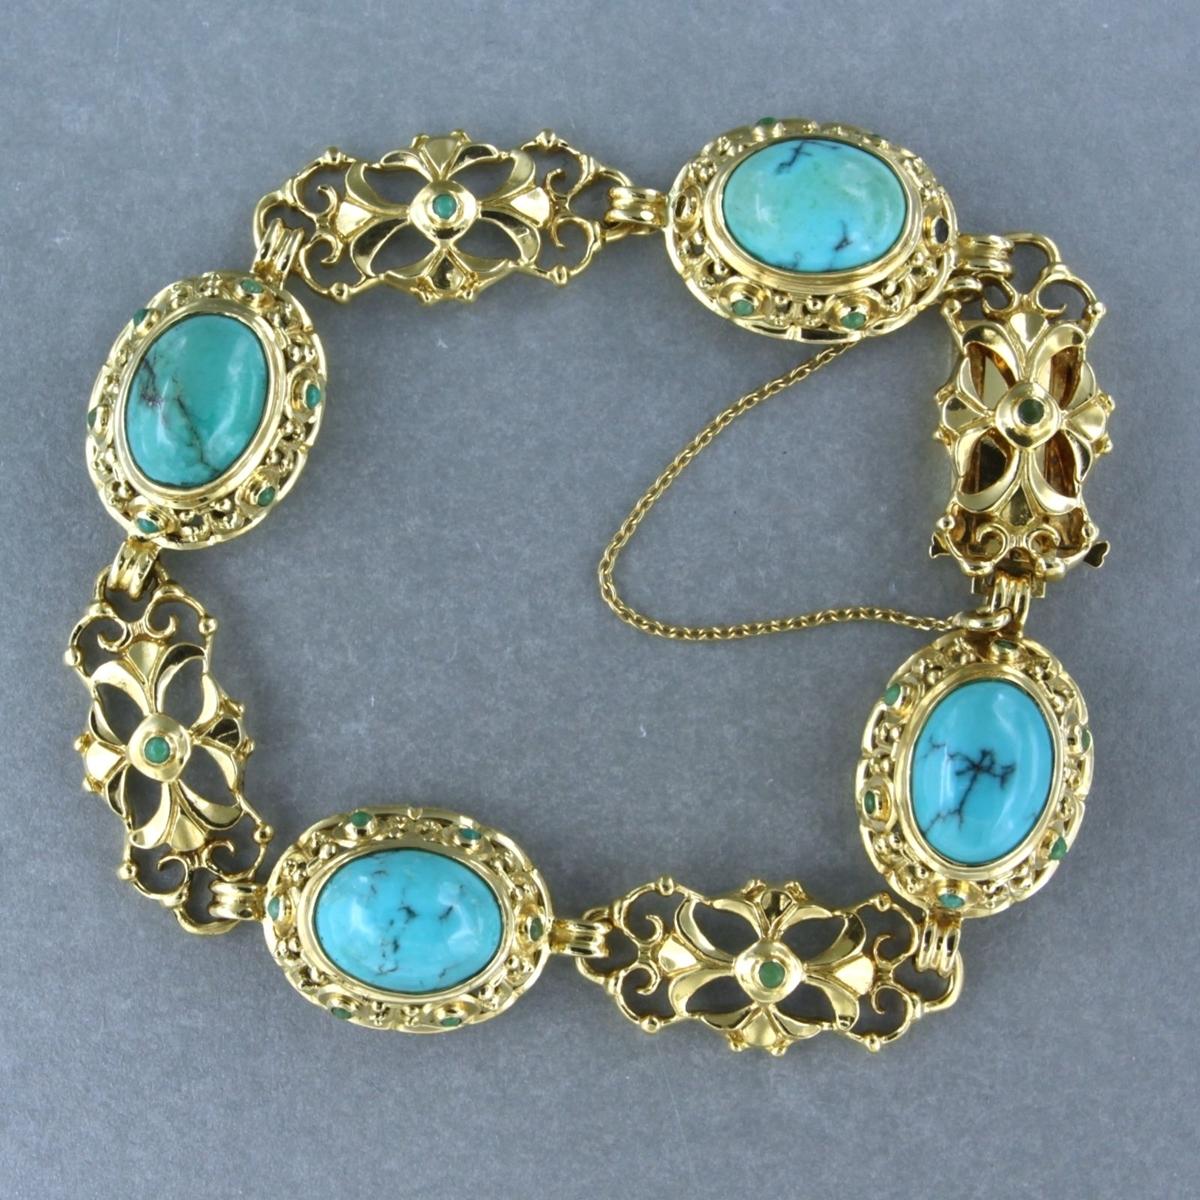 Women's 18k yellow gold bracelet set with turquoise - 18 cm long For Sale